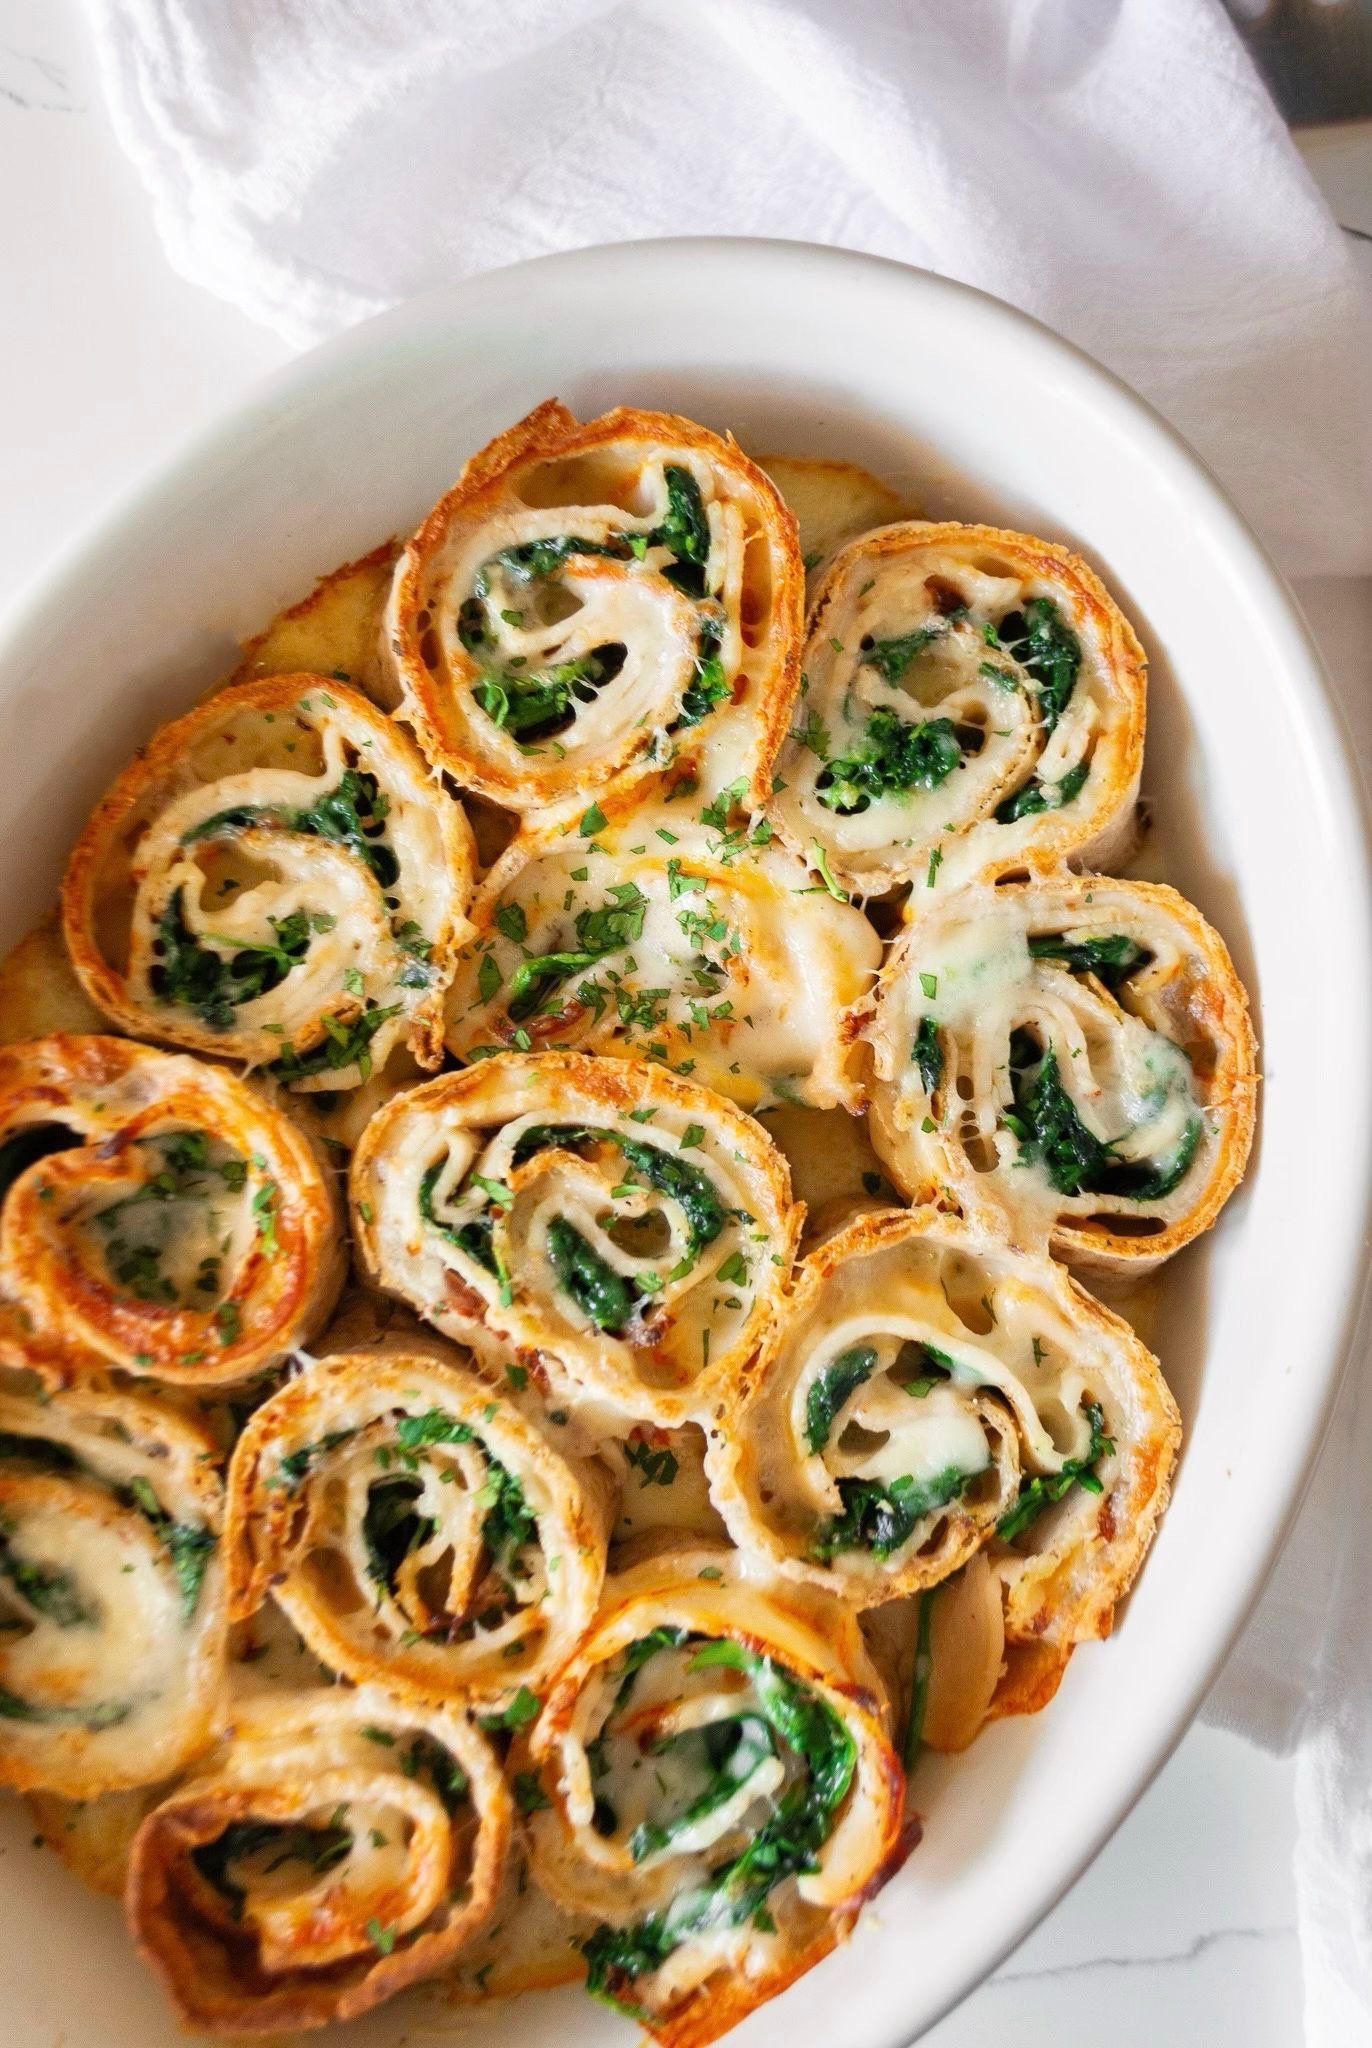 Cheesy Baked Turkey and Spinach Pinwheels out of the oven